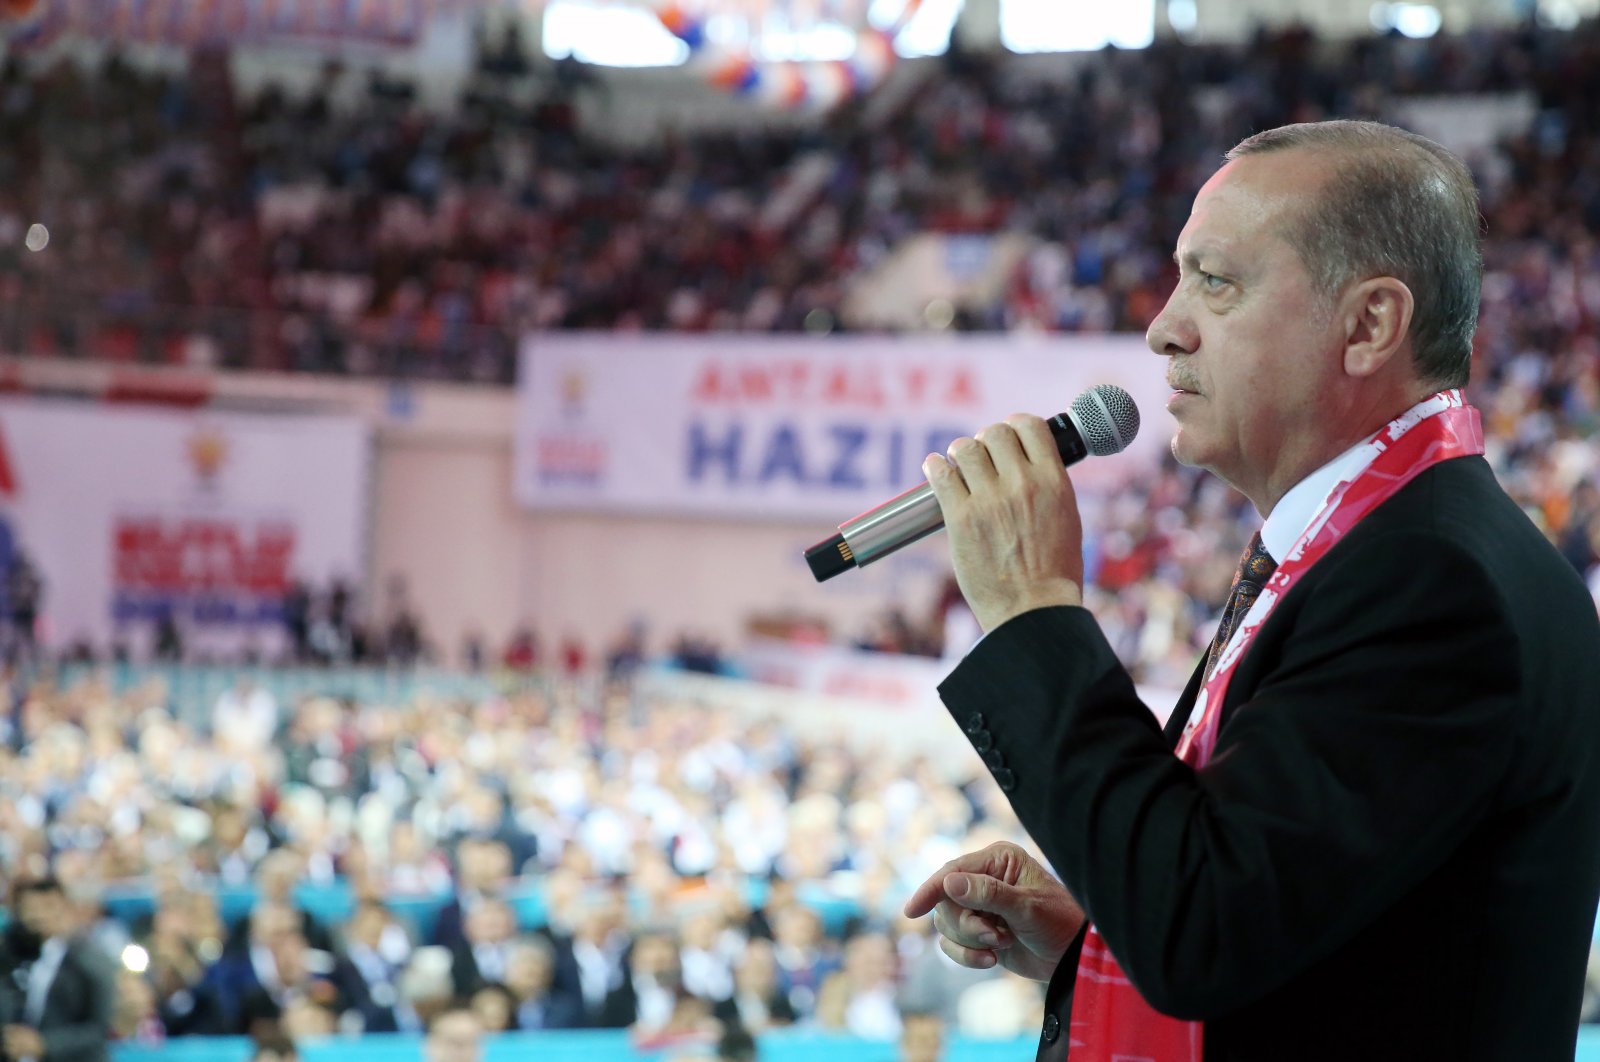 President Recep Tayyip Erdoğan speaks at the 6th Ordinary Convention in Antalya province, Turkey, March 3, 2018. (Presidential handout photo)